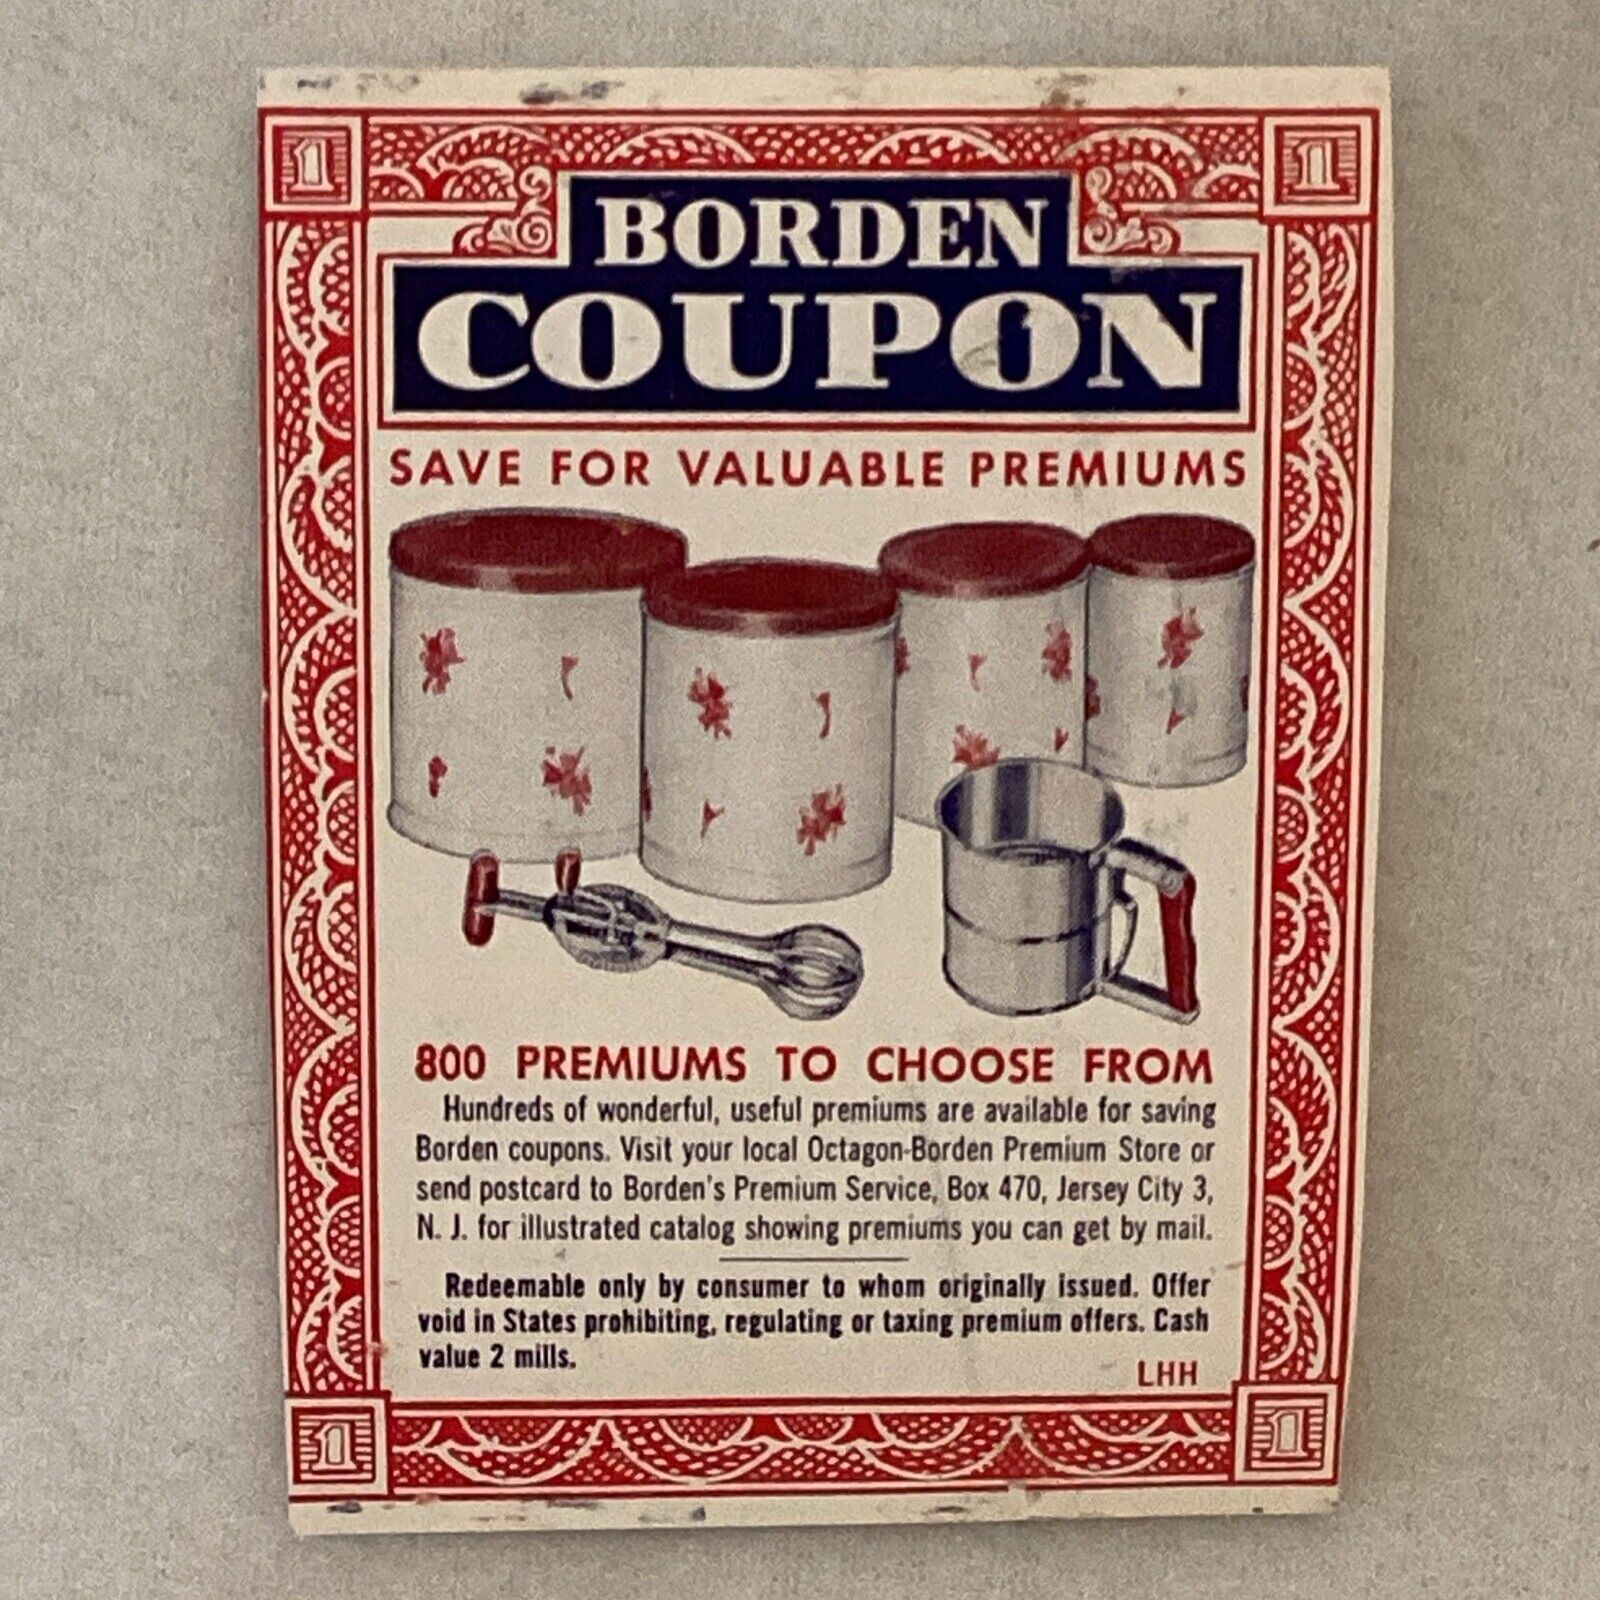 Antique 1930s Borden Coupon Save For Valuable Premiums OHI Canisters Red Boarder